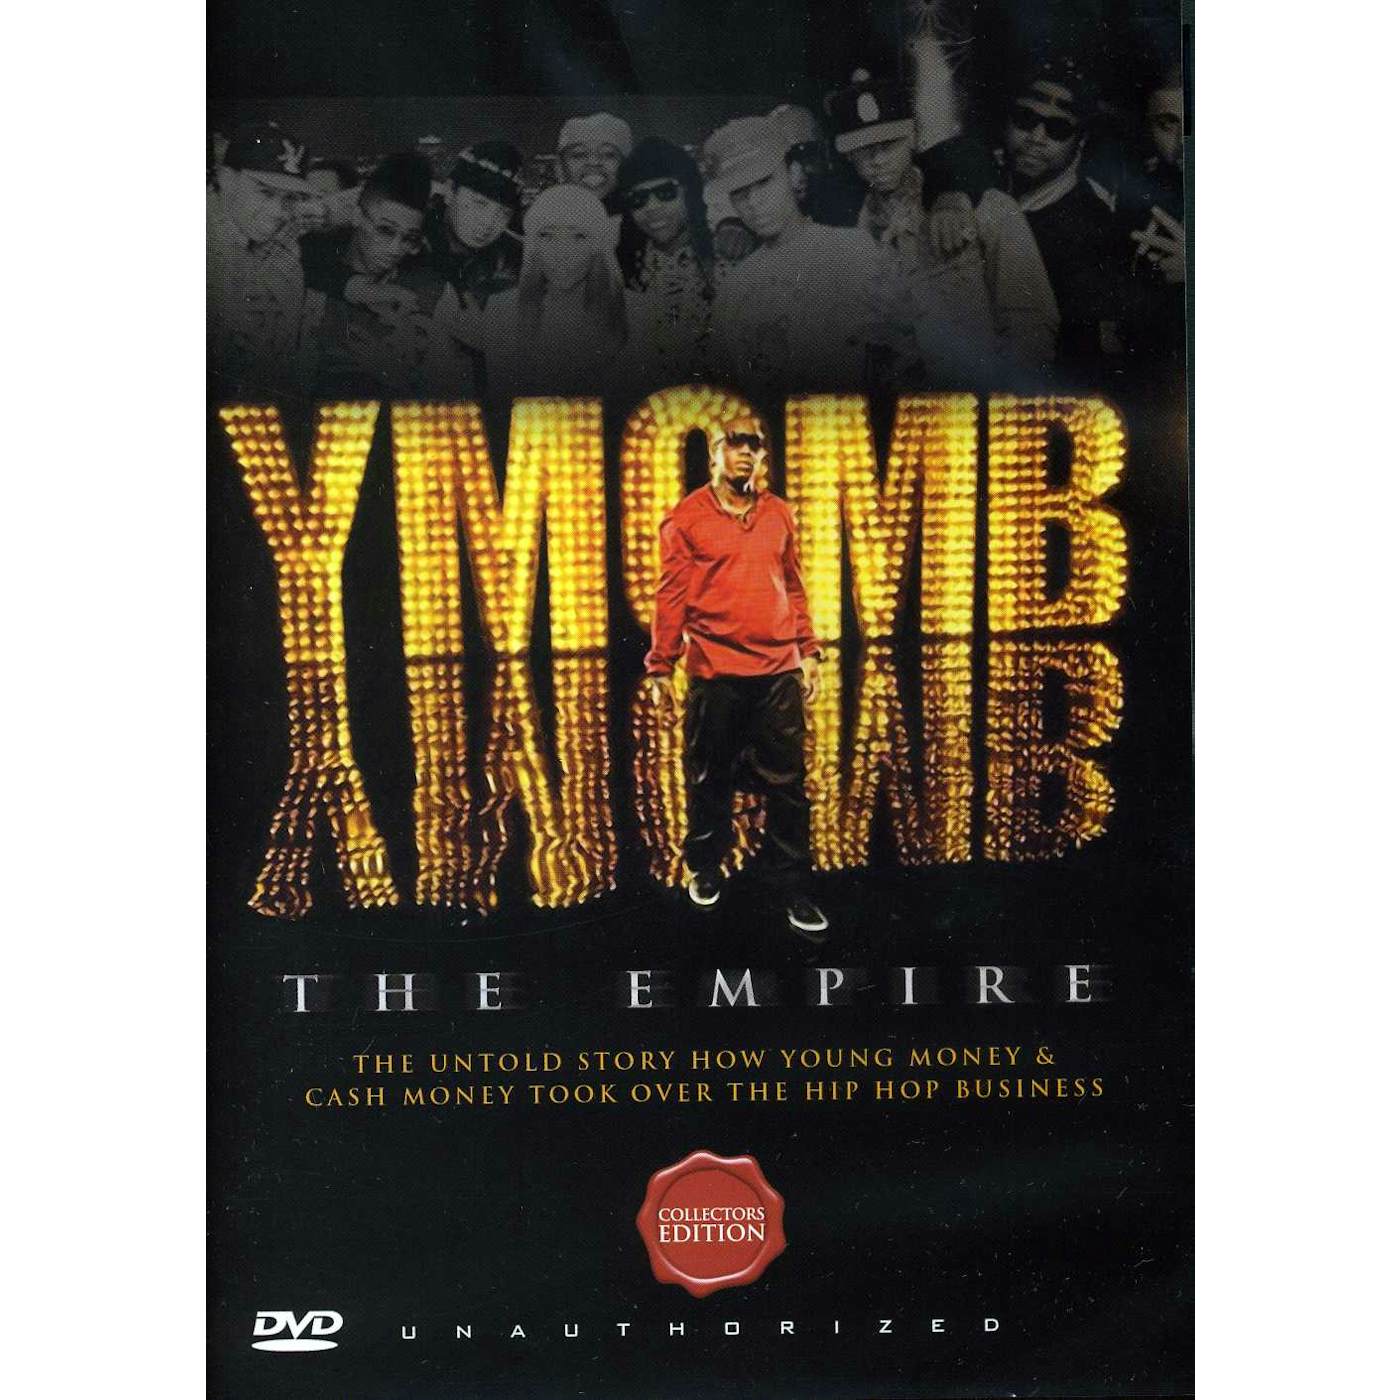 YMCMB EMPIRE DVD